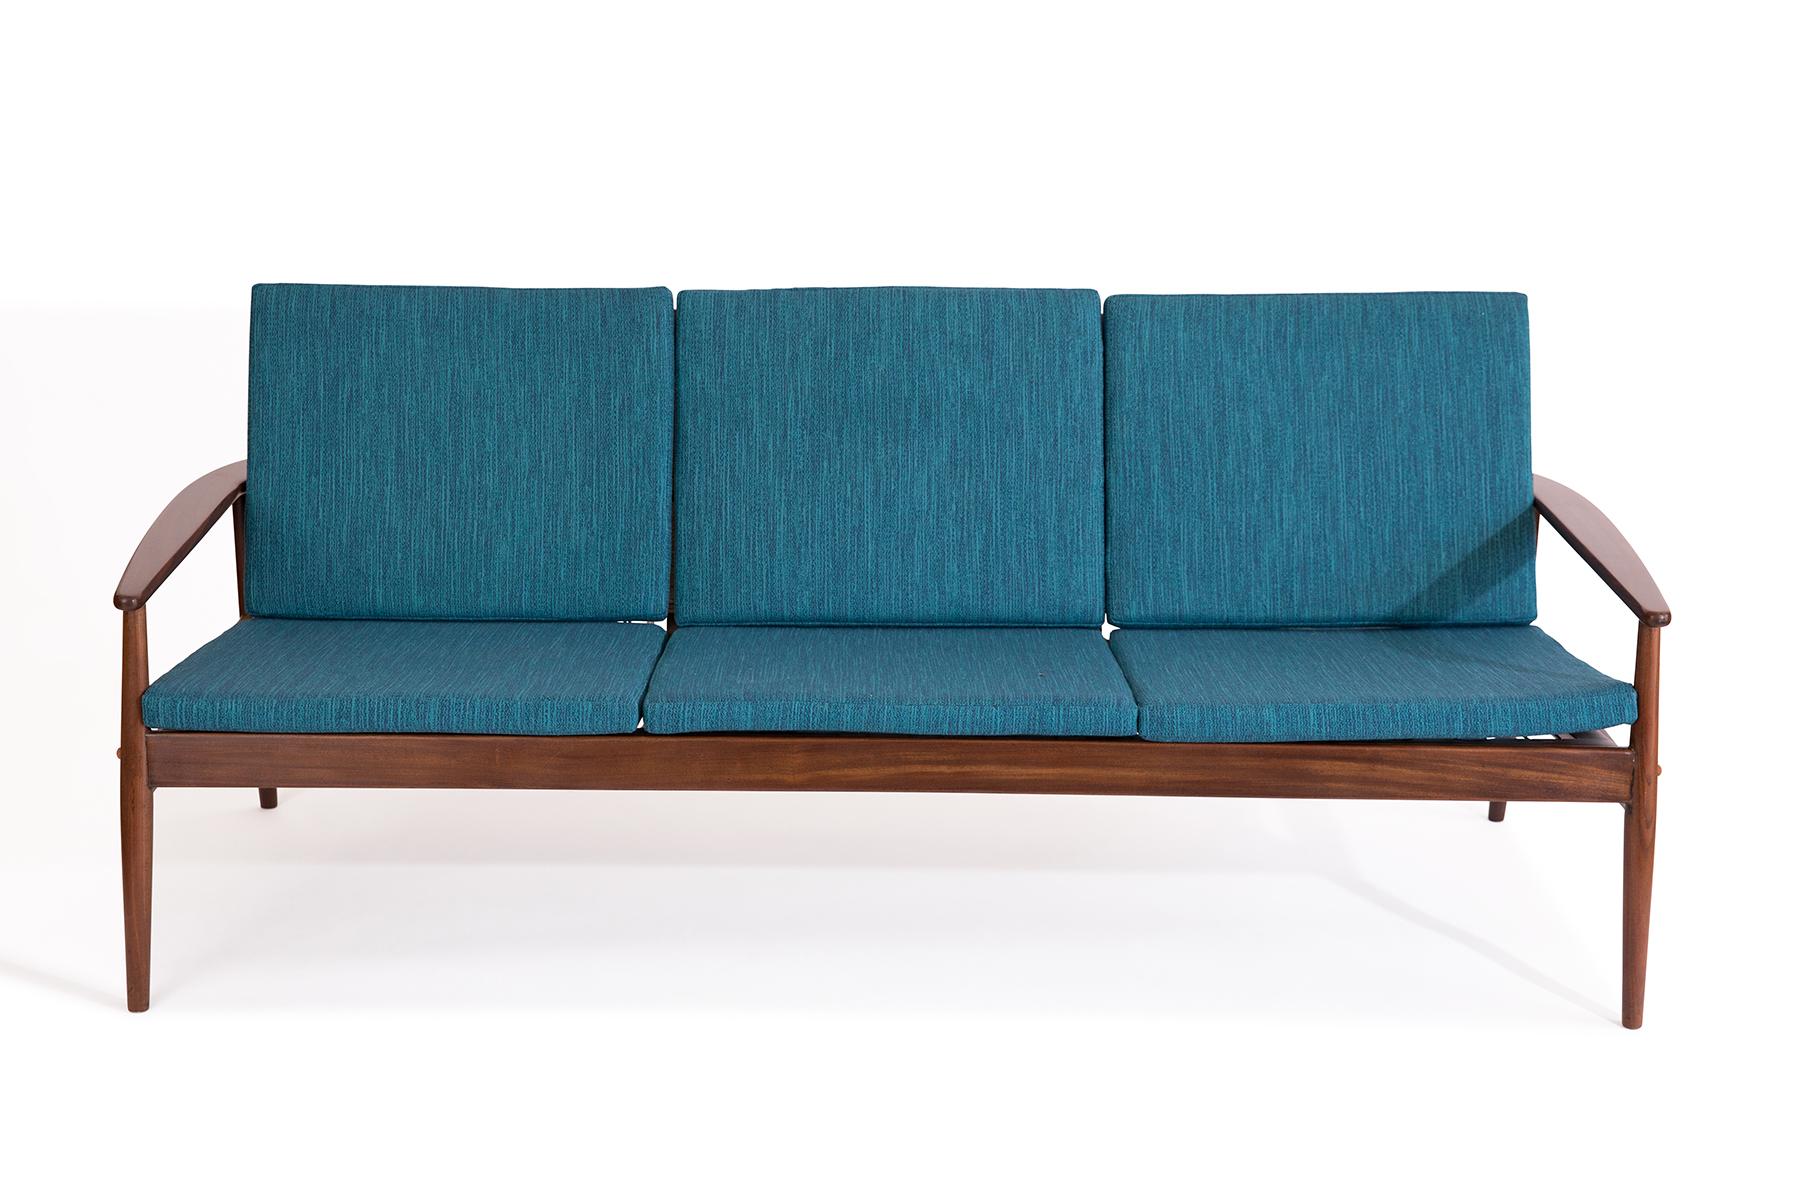 Hans Olsen for Juul Kristensen solid teak cane and upholstered sofa, circa early 1960s. This stunning example has been newly finished, upholstered and recaned.